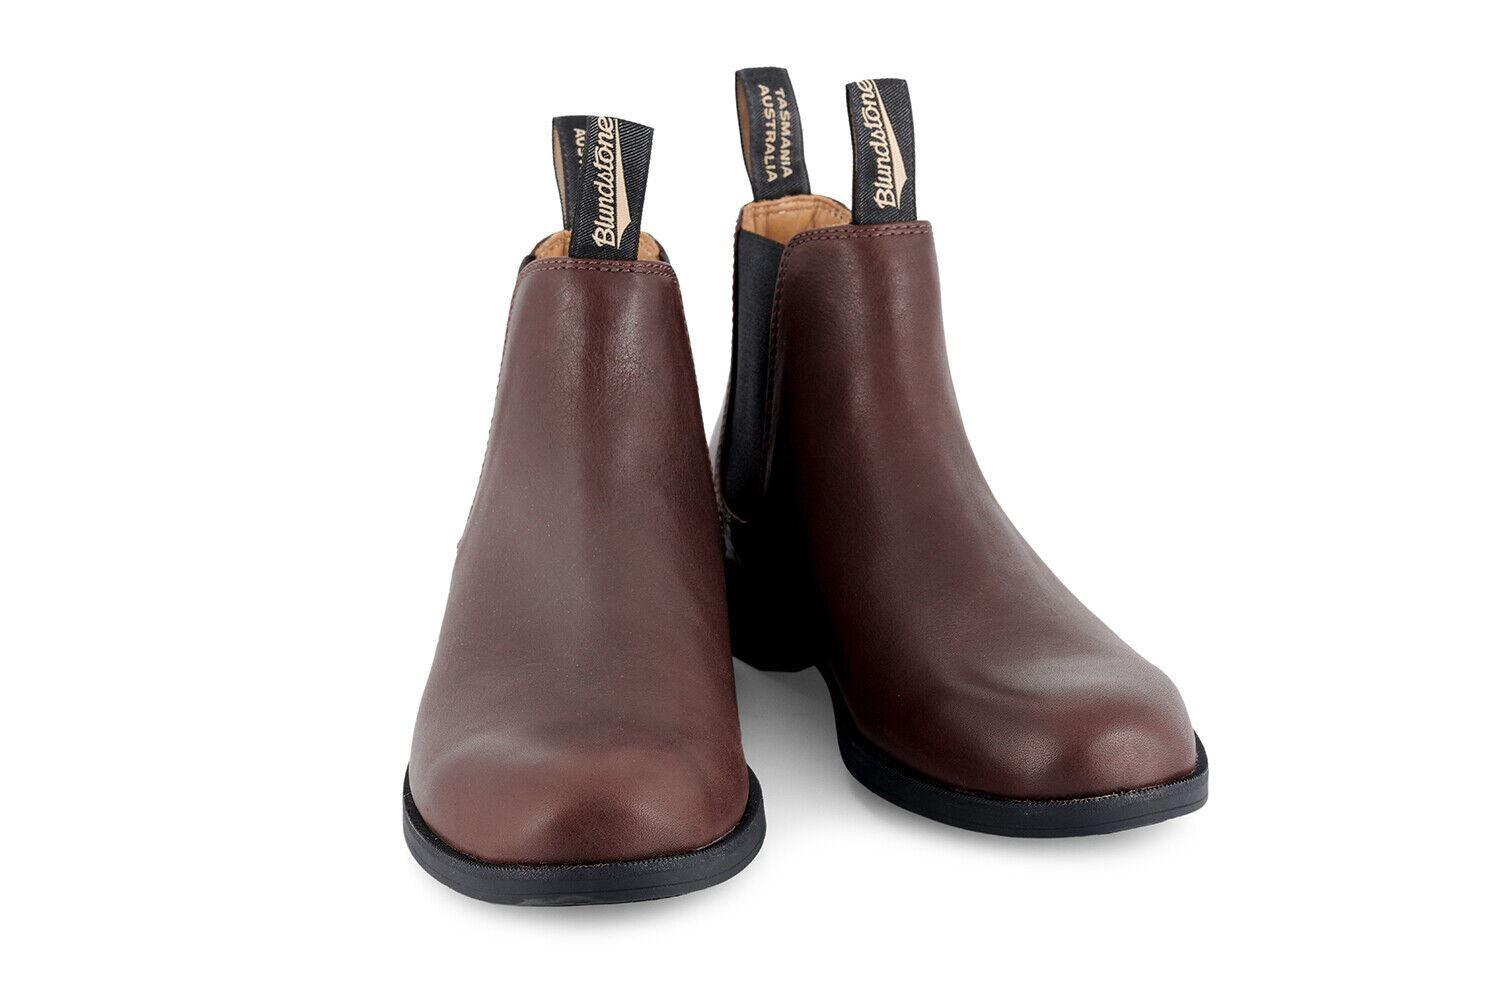 Blundstone 1900 Brown Chelsea Boots Chestnut Leather Mens Dress Ankle Classic - Upperclass Fashions 